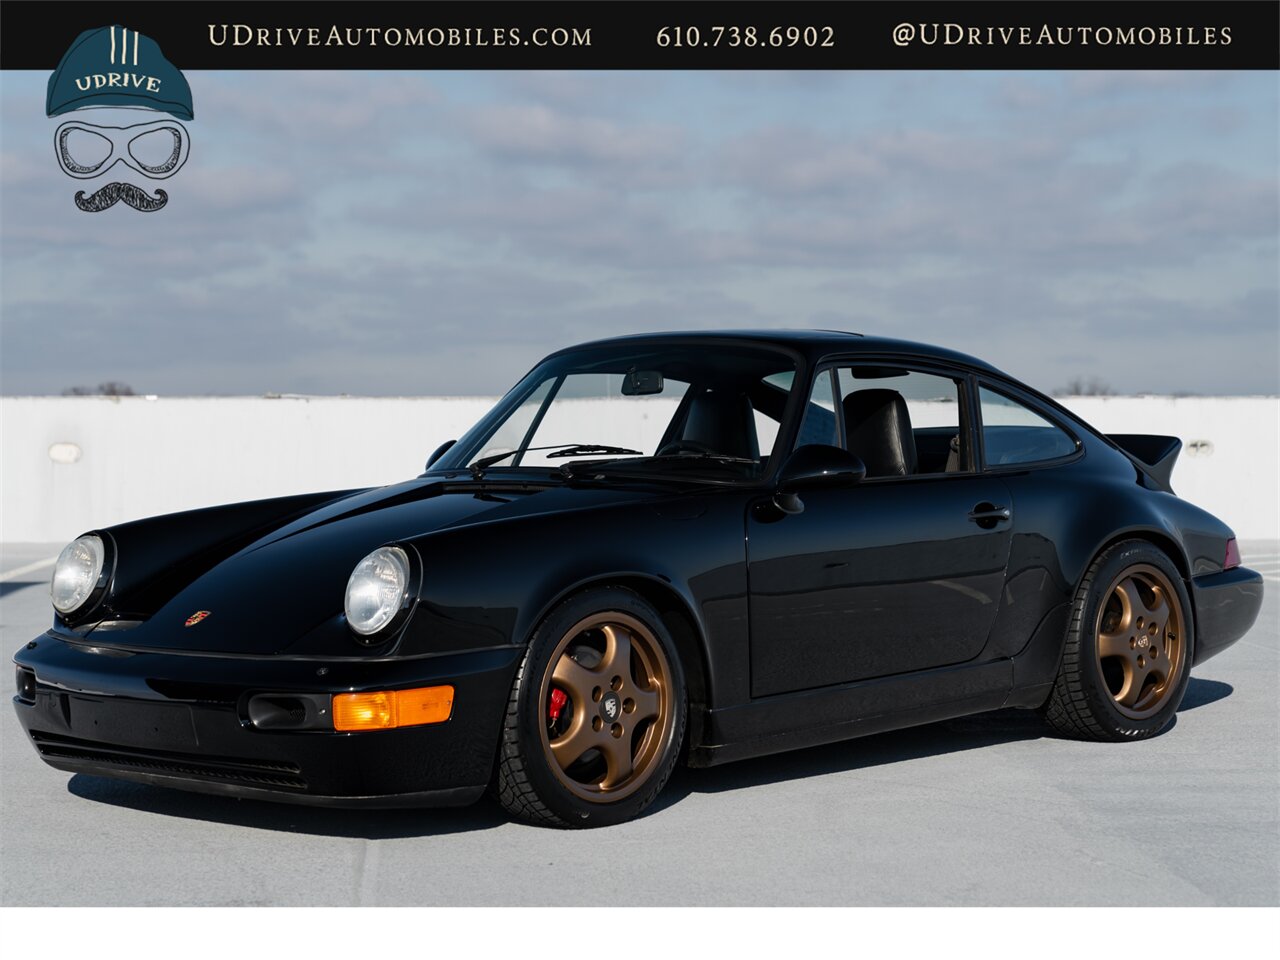 1989 Porsche 911 C4  964 Carrera 4 C4 5 Speed Manual $33k in Recent Service History - Photo 12 - West Chester, PA 19382